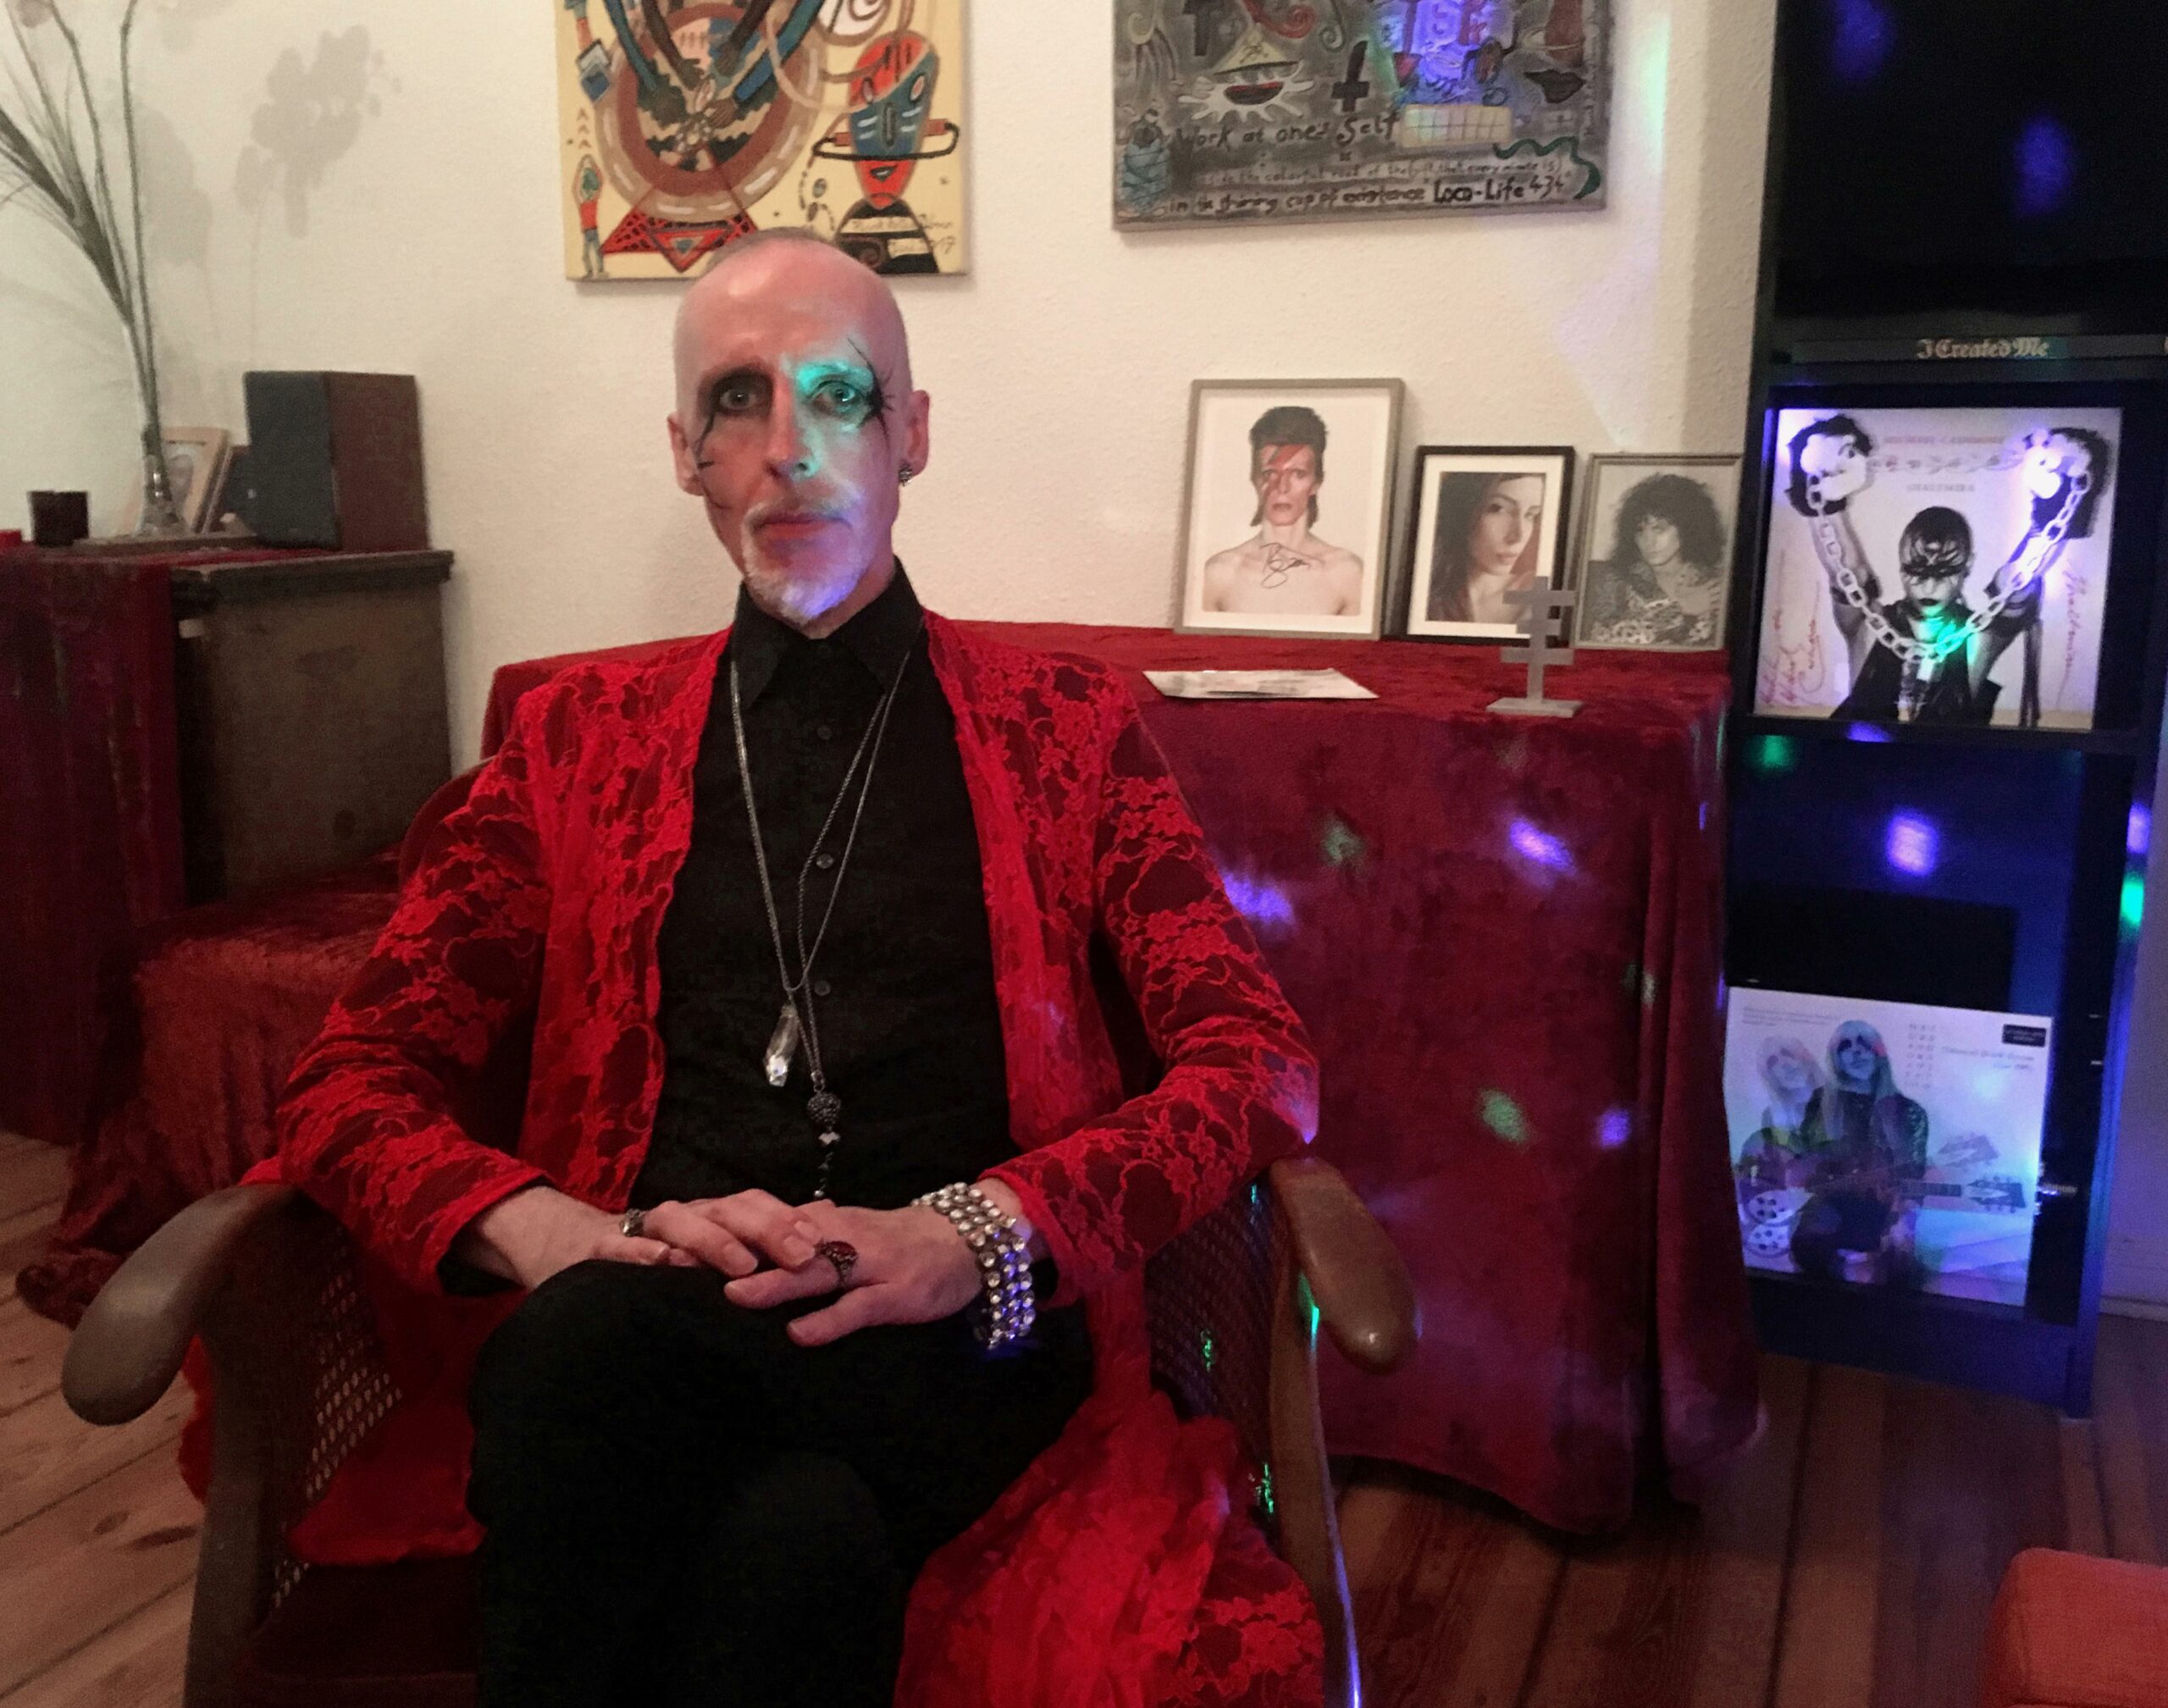 We Chat With Musician, Artist & Mystic Michael Cashmore of Nature and Organisation; Member of Current 93; & Founder of The Hidden Throne 434.